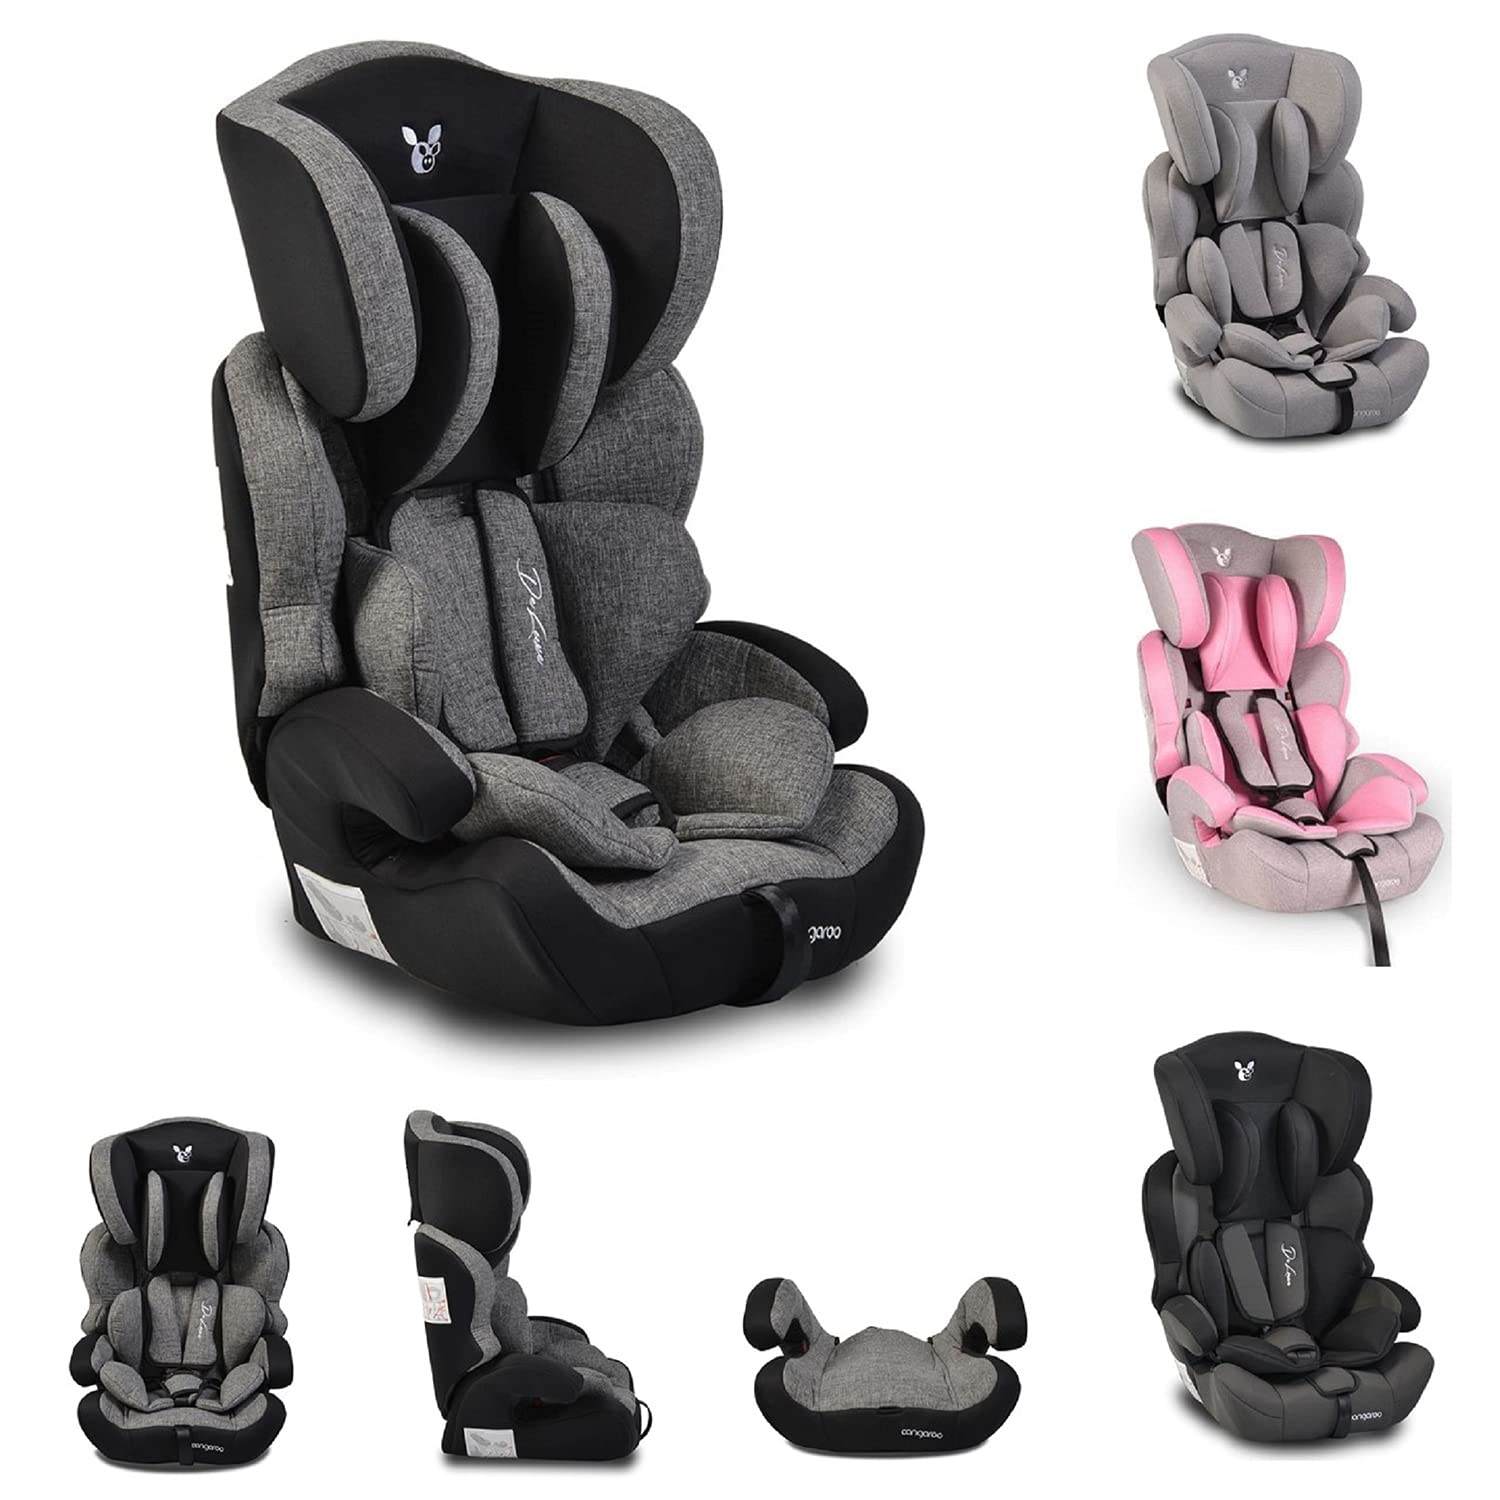 Cangaroo Deluxe Child Seat Group 1/2/3 (9-36 kg) 1 to 12 Years Adjustable Colour: Dark Grey